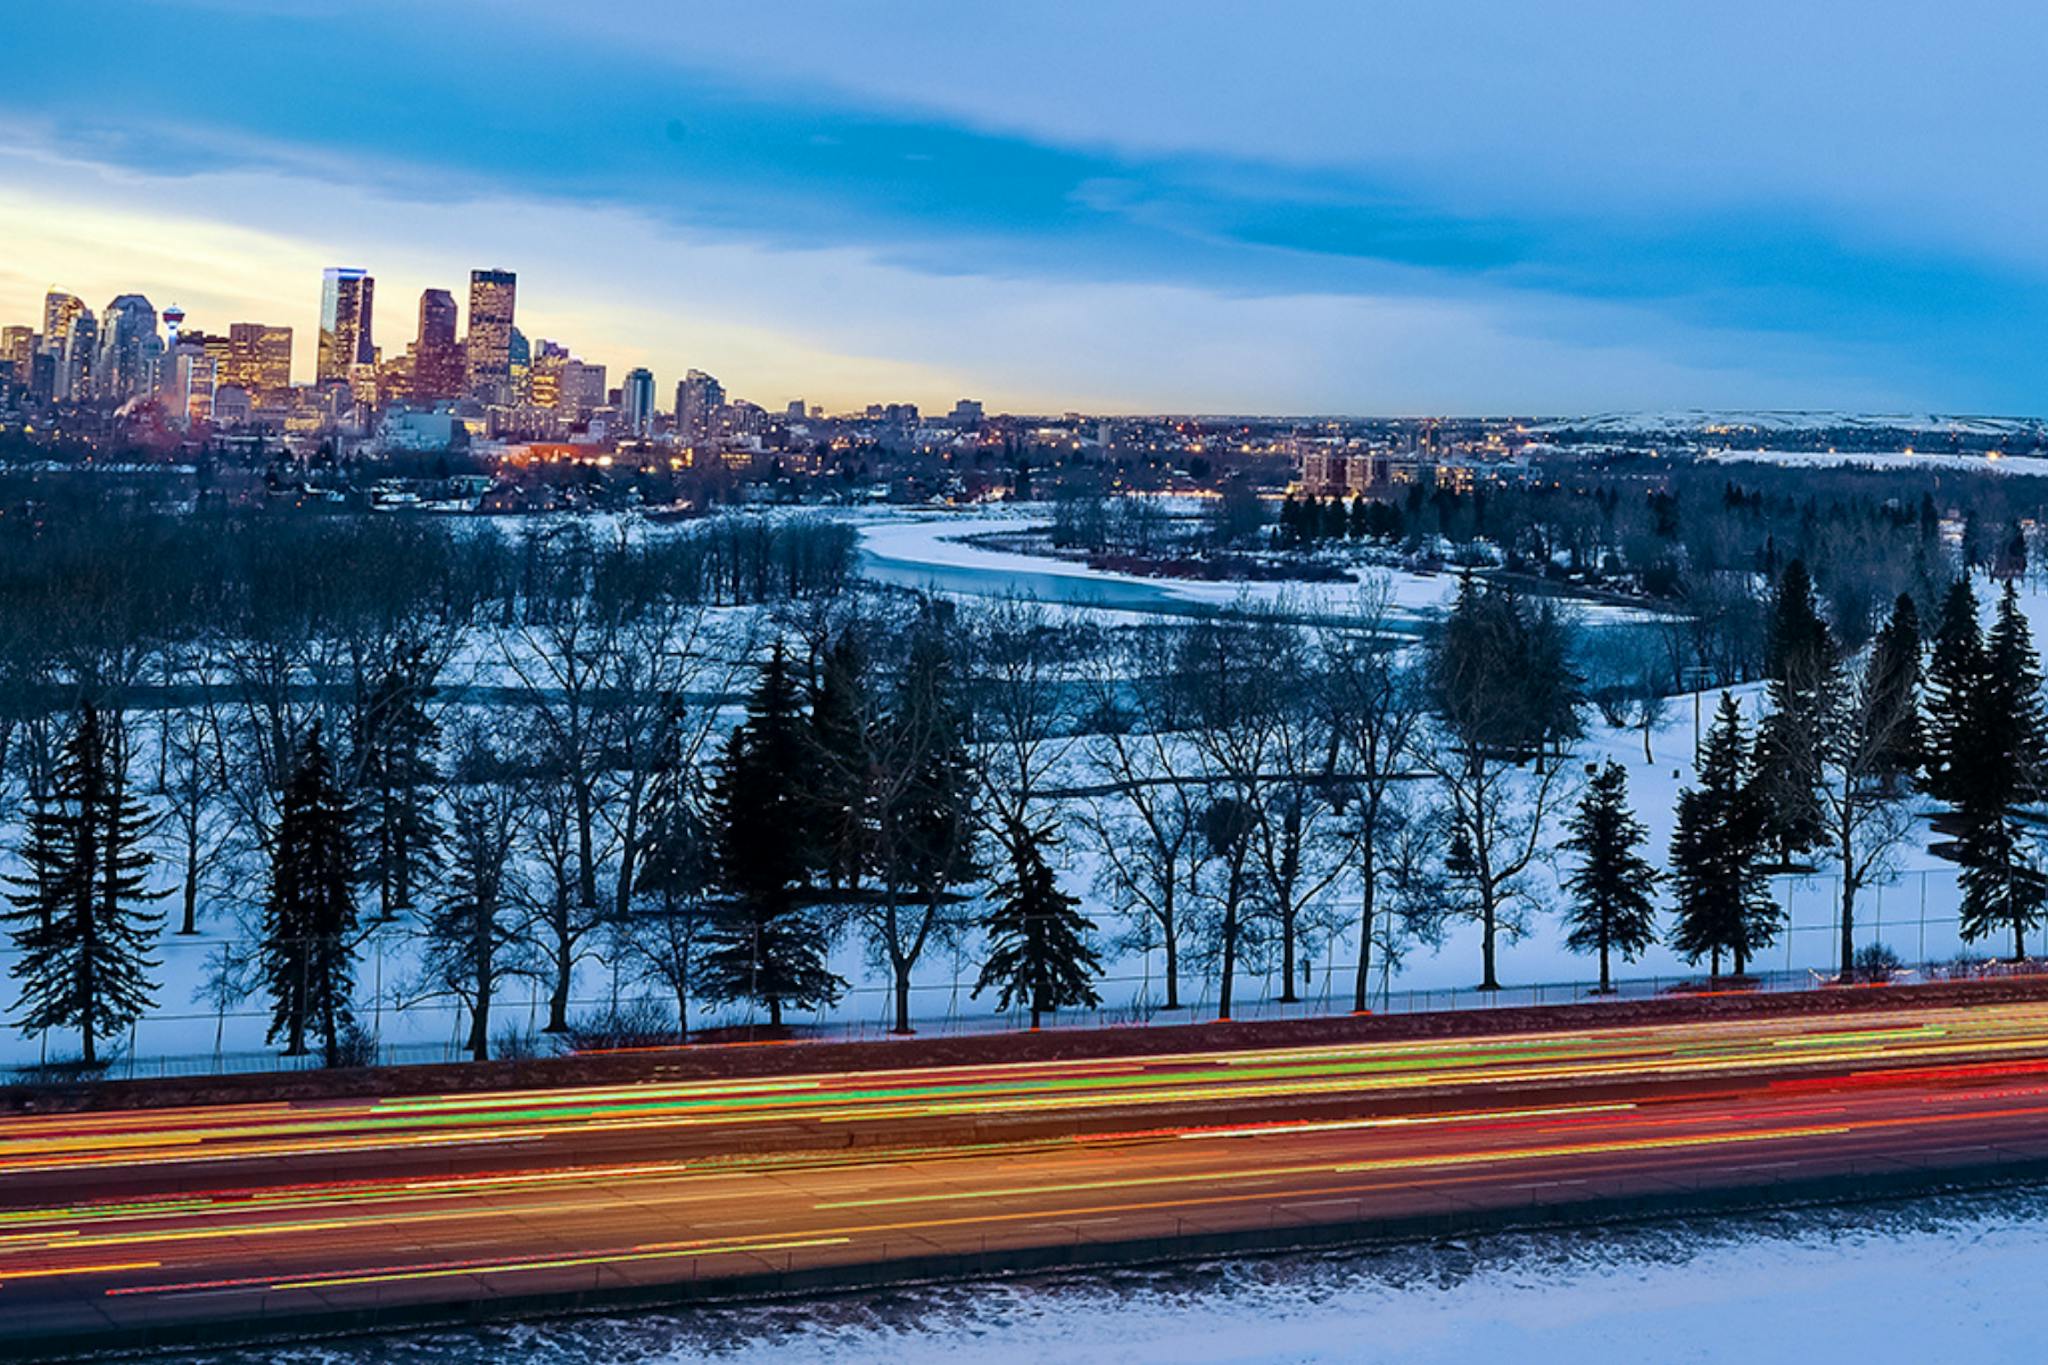 Winter picture of Calgary skyline at dusk with a road with car lights stretched showing fast traffic 